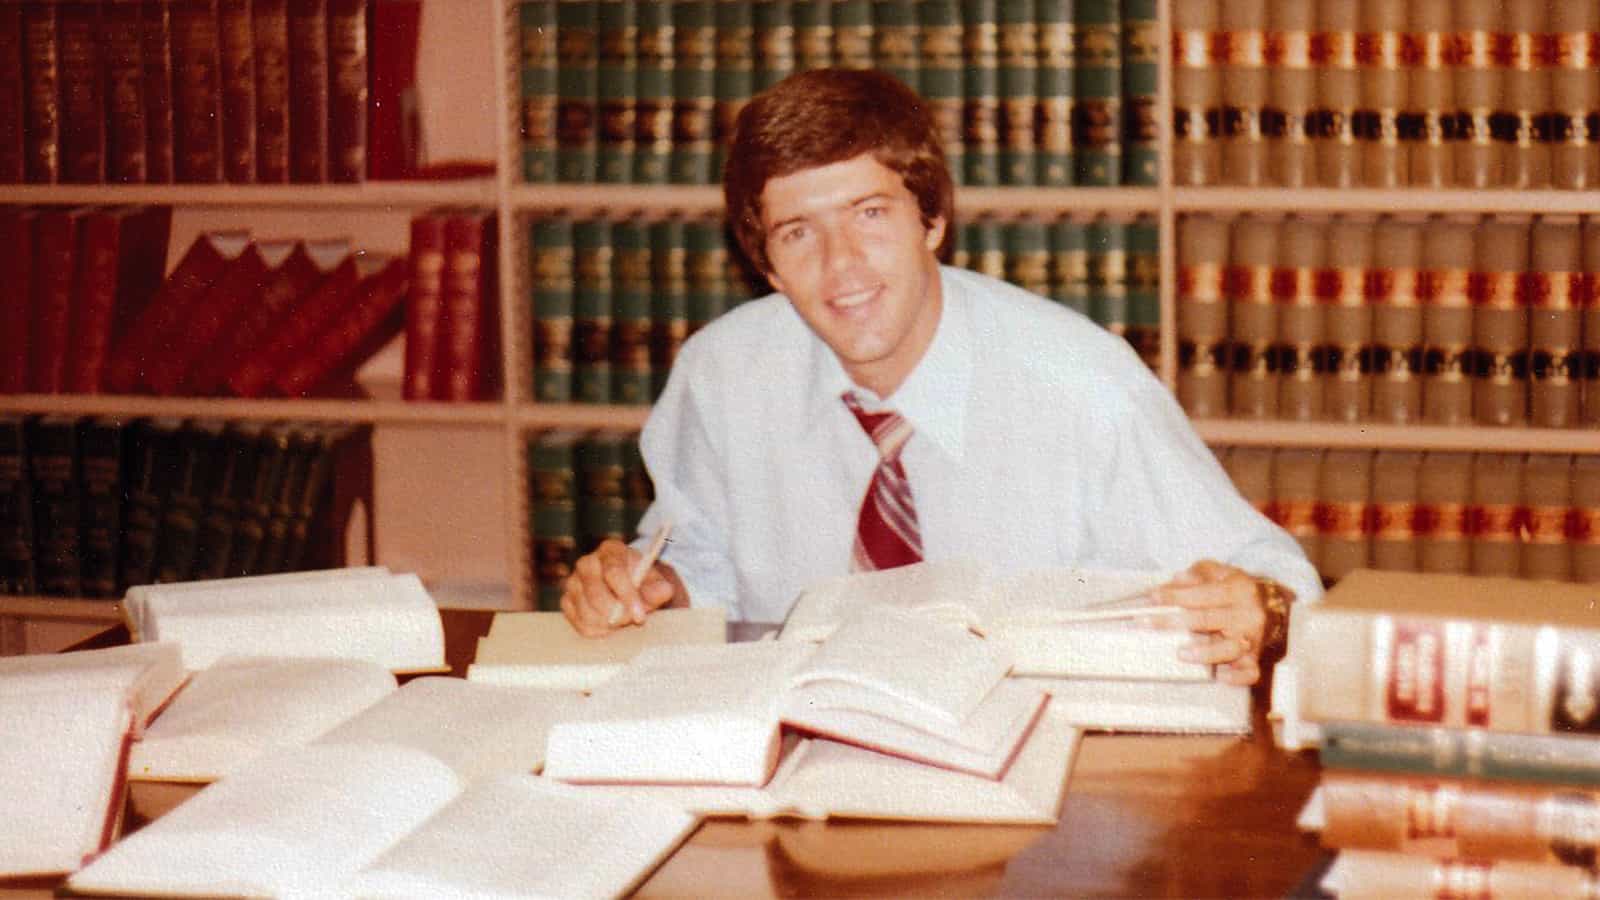 Photo of Mark Burget in the firm law library in 1980.